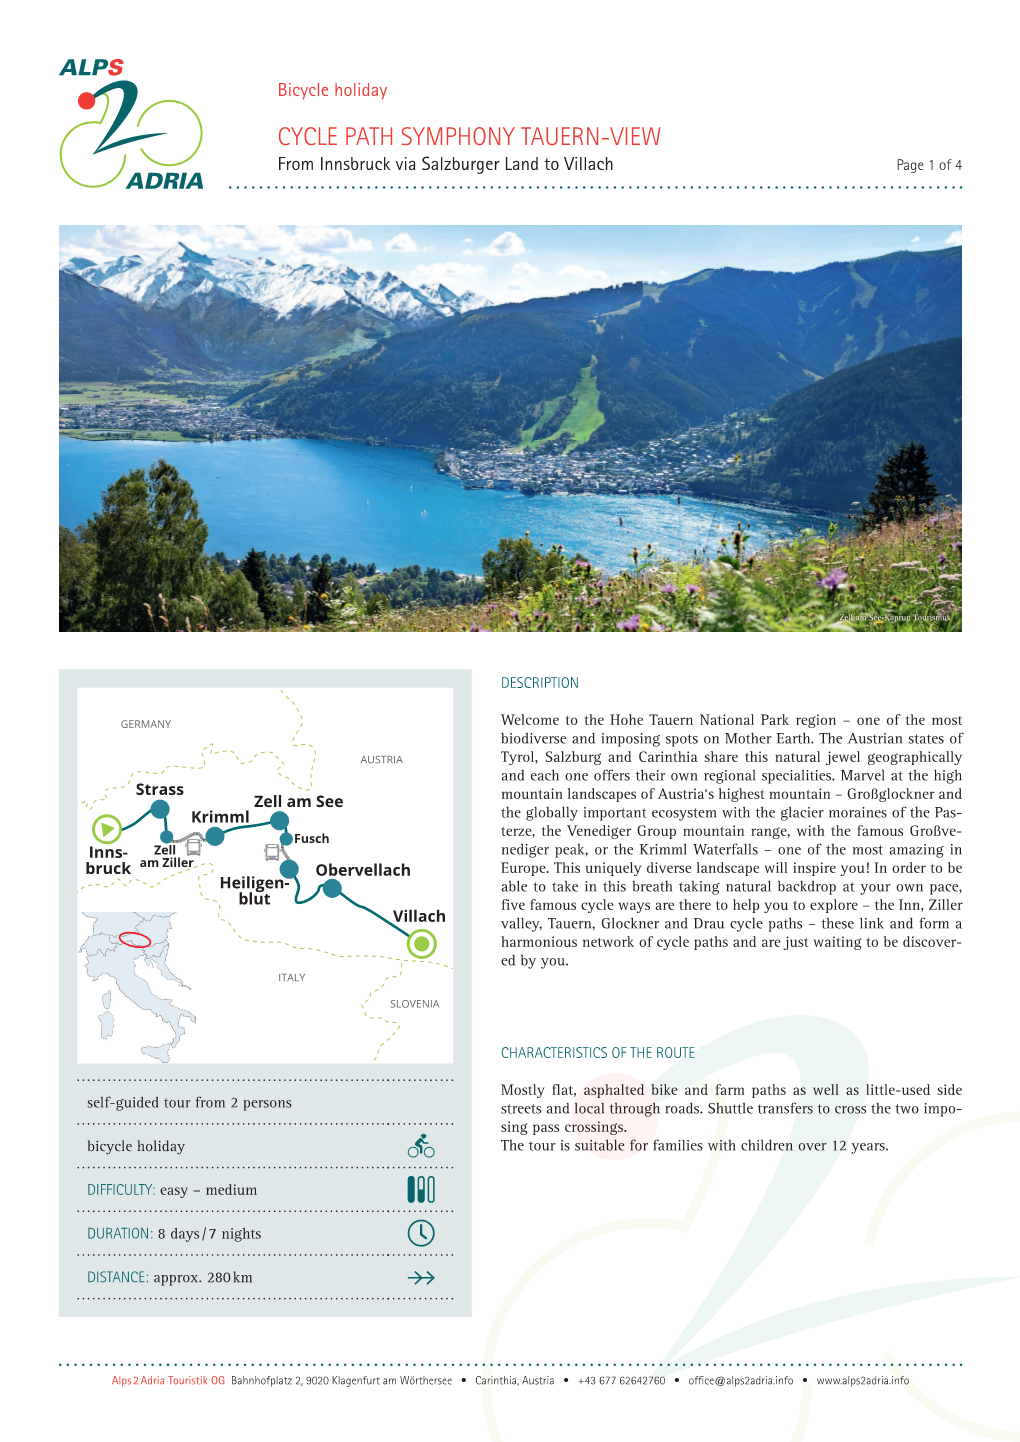 CYCLE PATH SYMPHONY TAUERN-VIEW from Innsbruck Via Salzburger Land to Villach Page 1 of 4